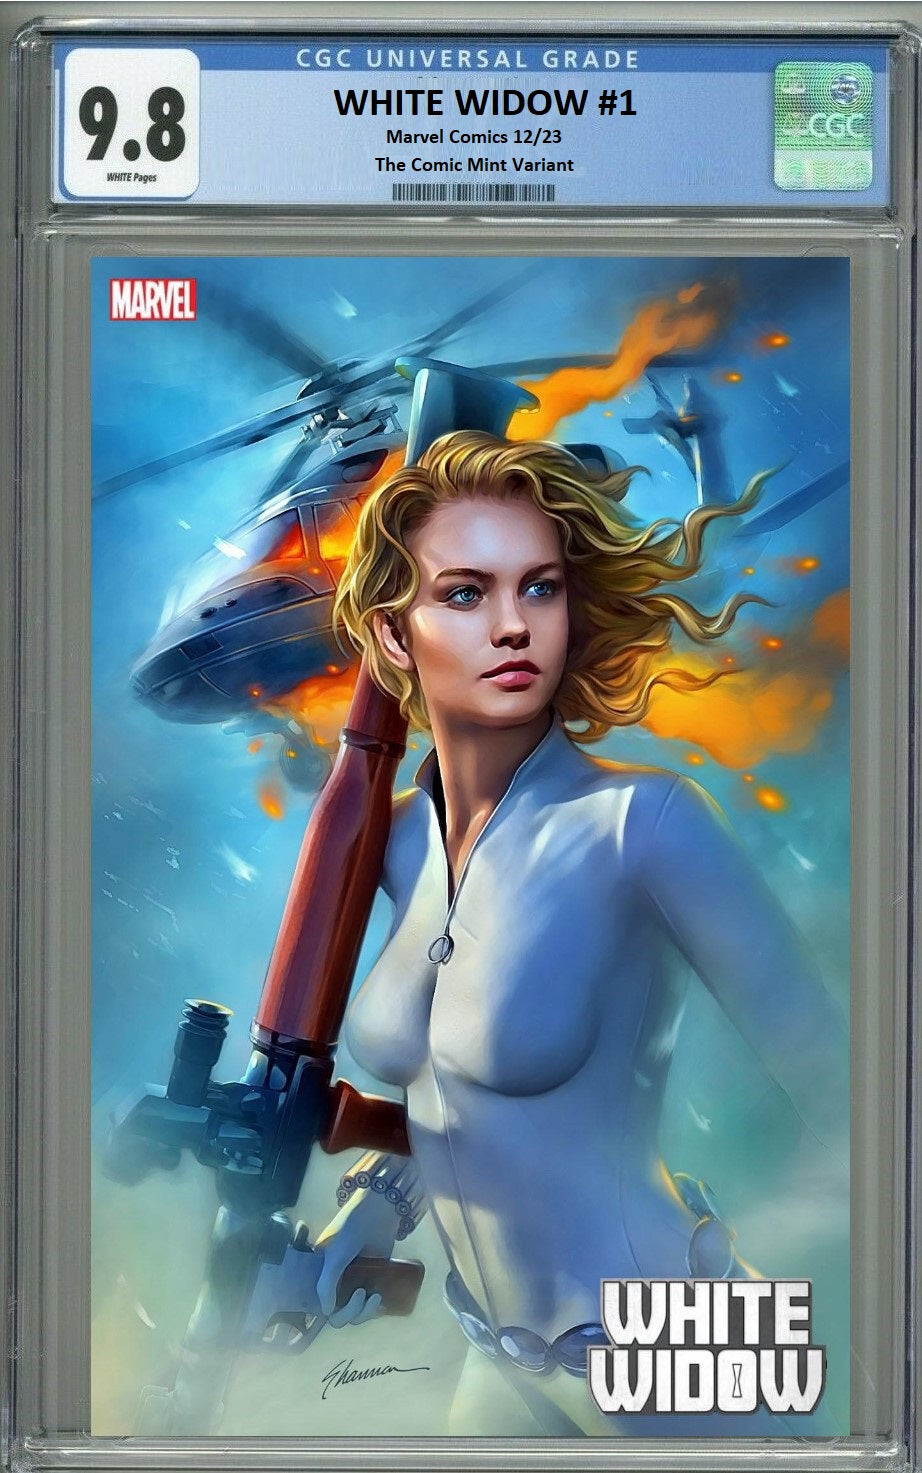 WHITE WIDOW #1 SHANNON MAER VARIANT LIMITED TO 500 COPIES WITH NUMBERED COA CGC 9.8 PREORDER